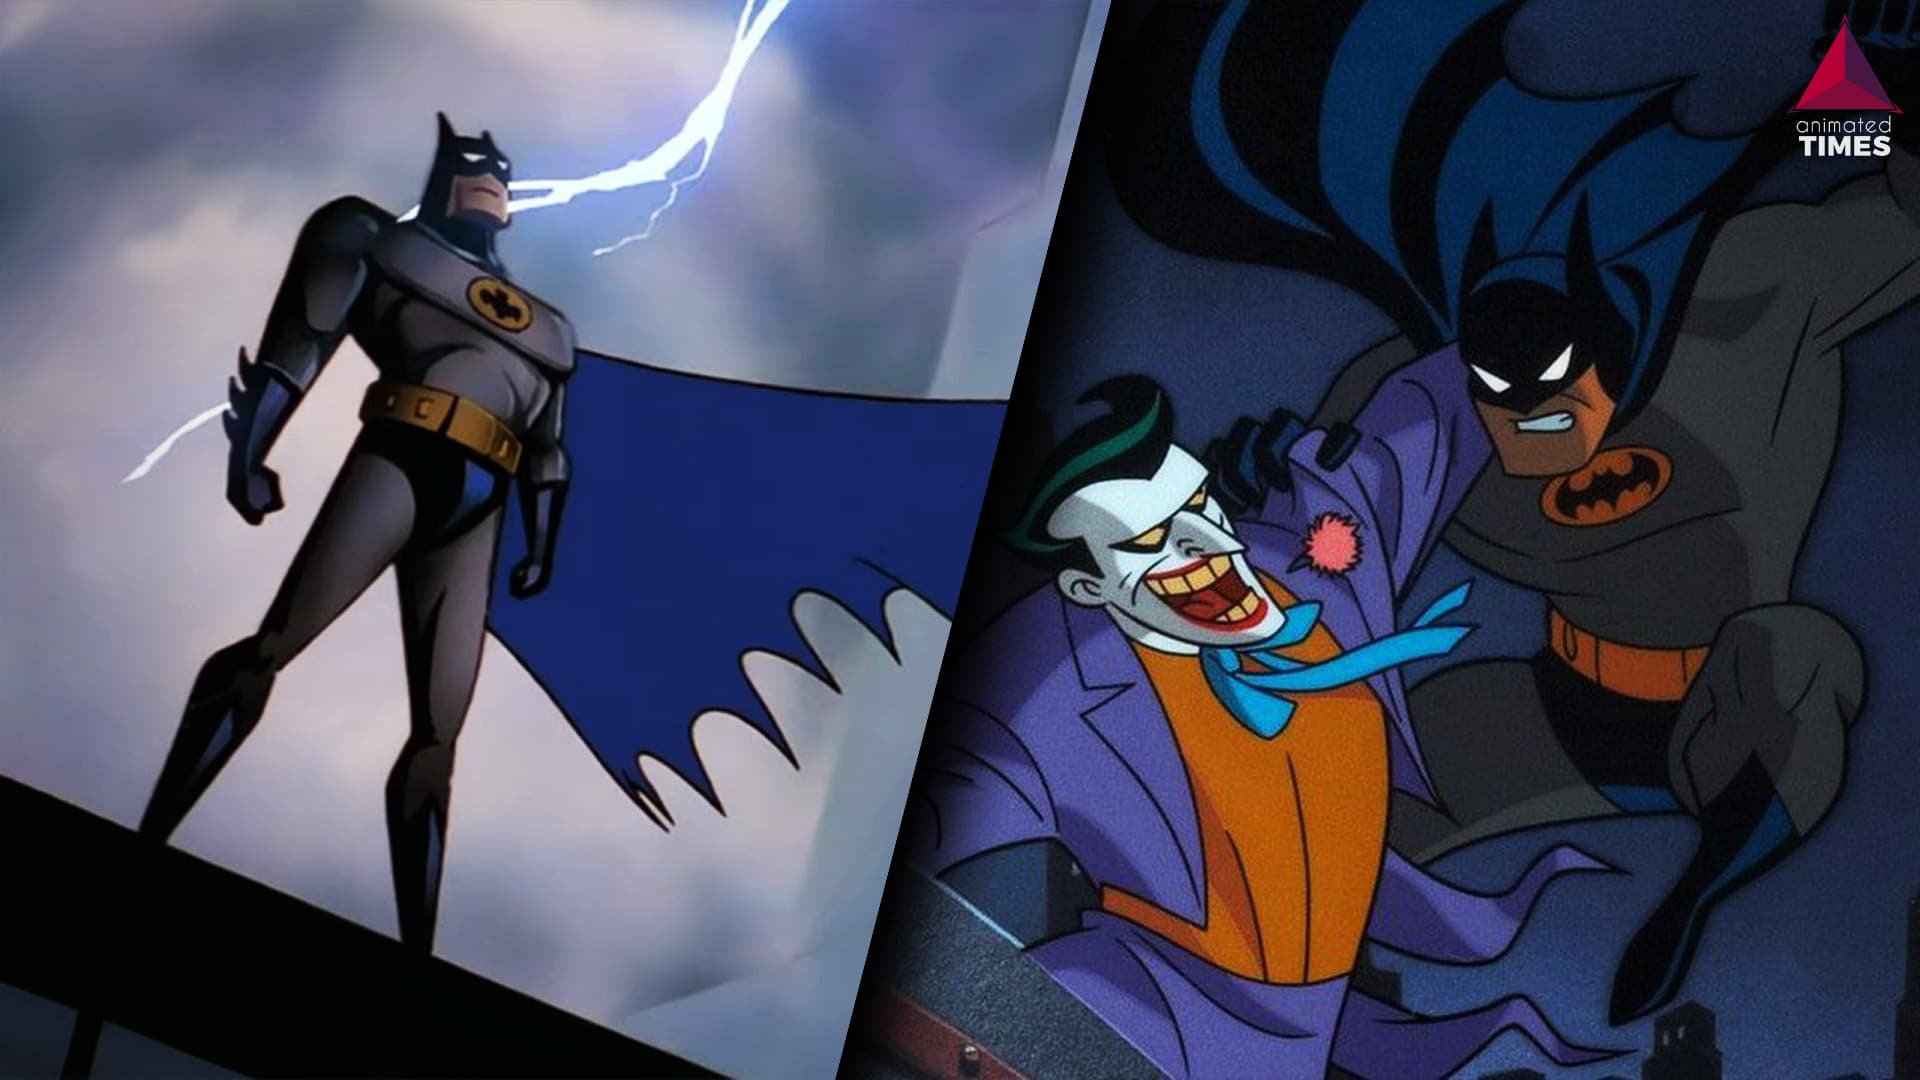 Batman: The Animated Series Reboot Coming To HBO Max Says Kevin Smith - Animated  Times